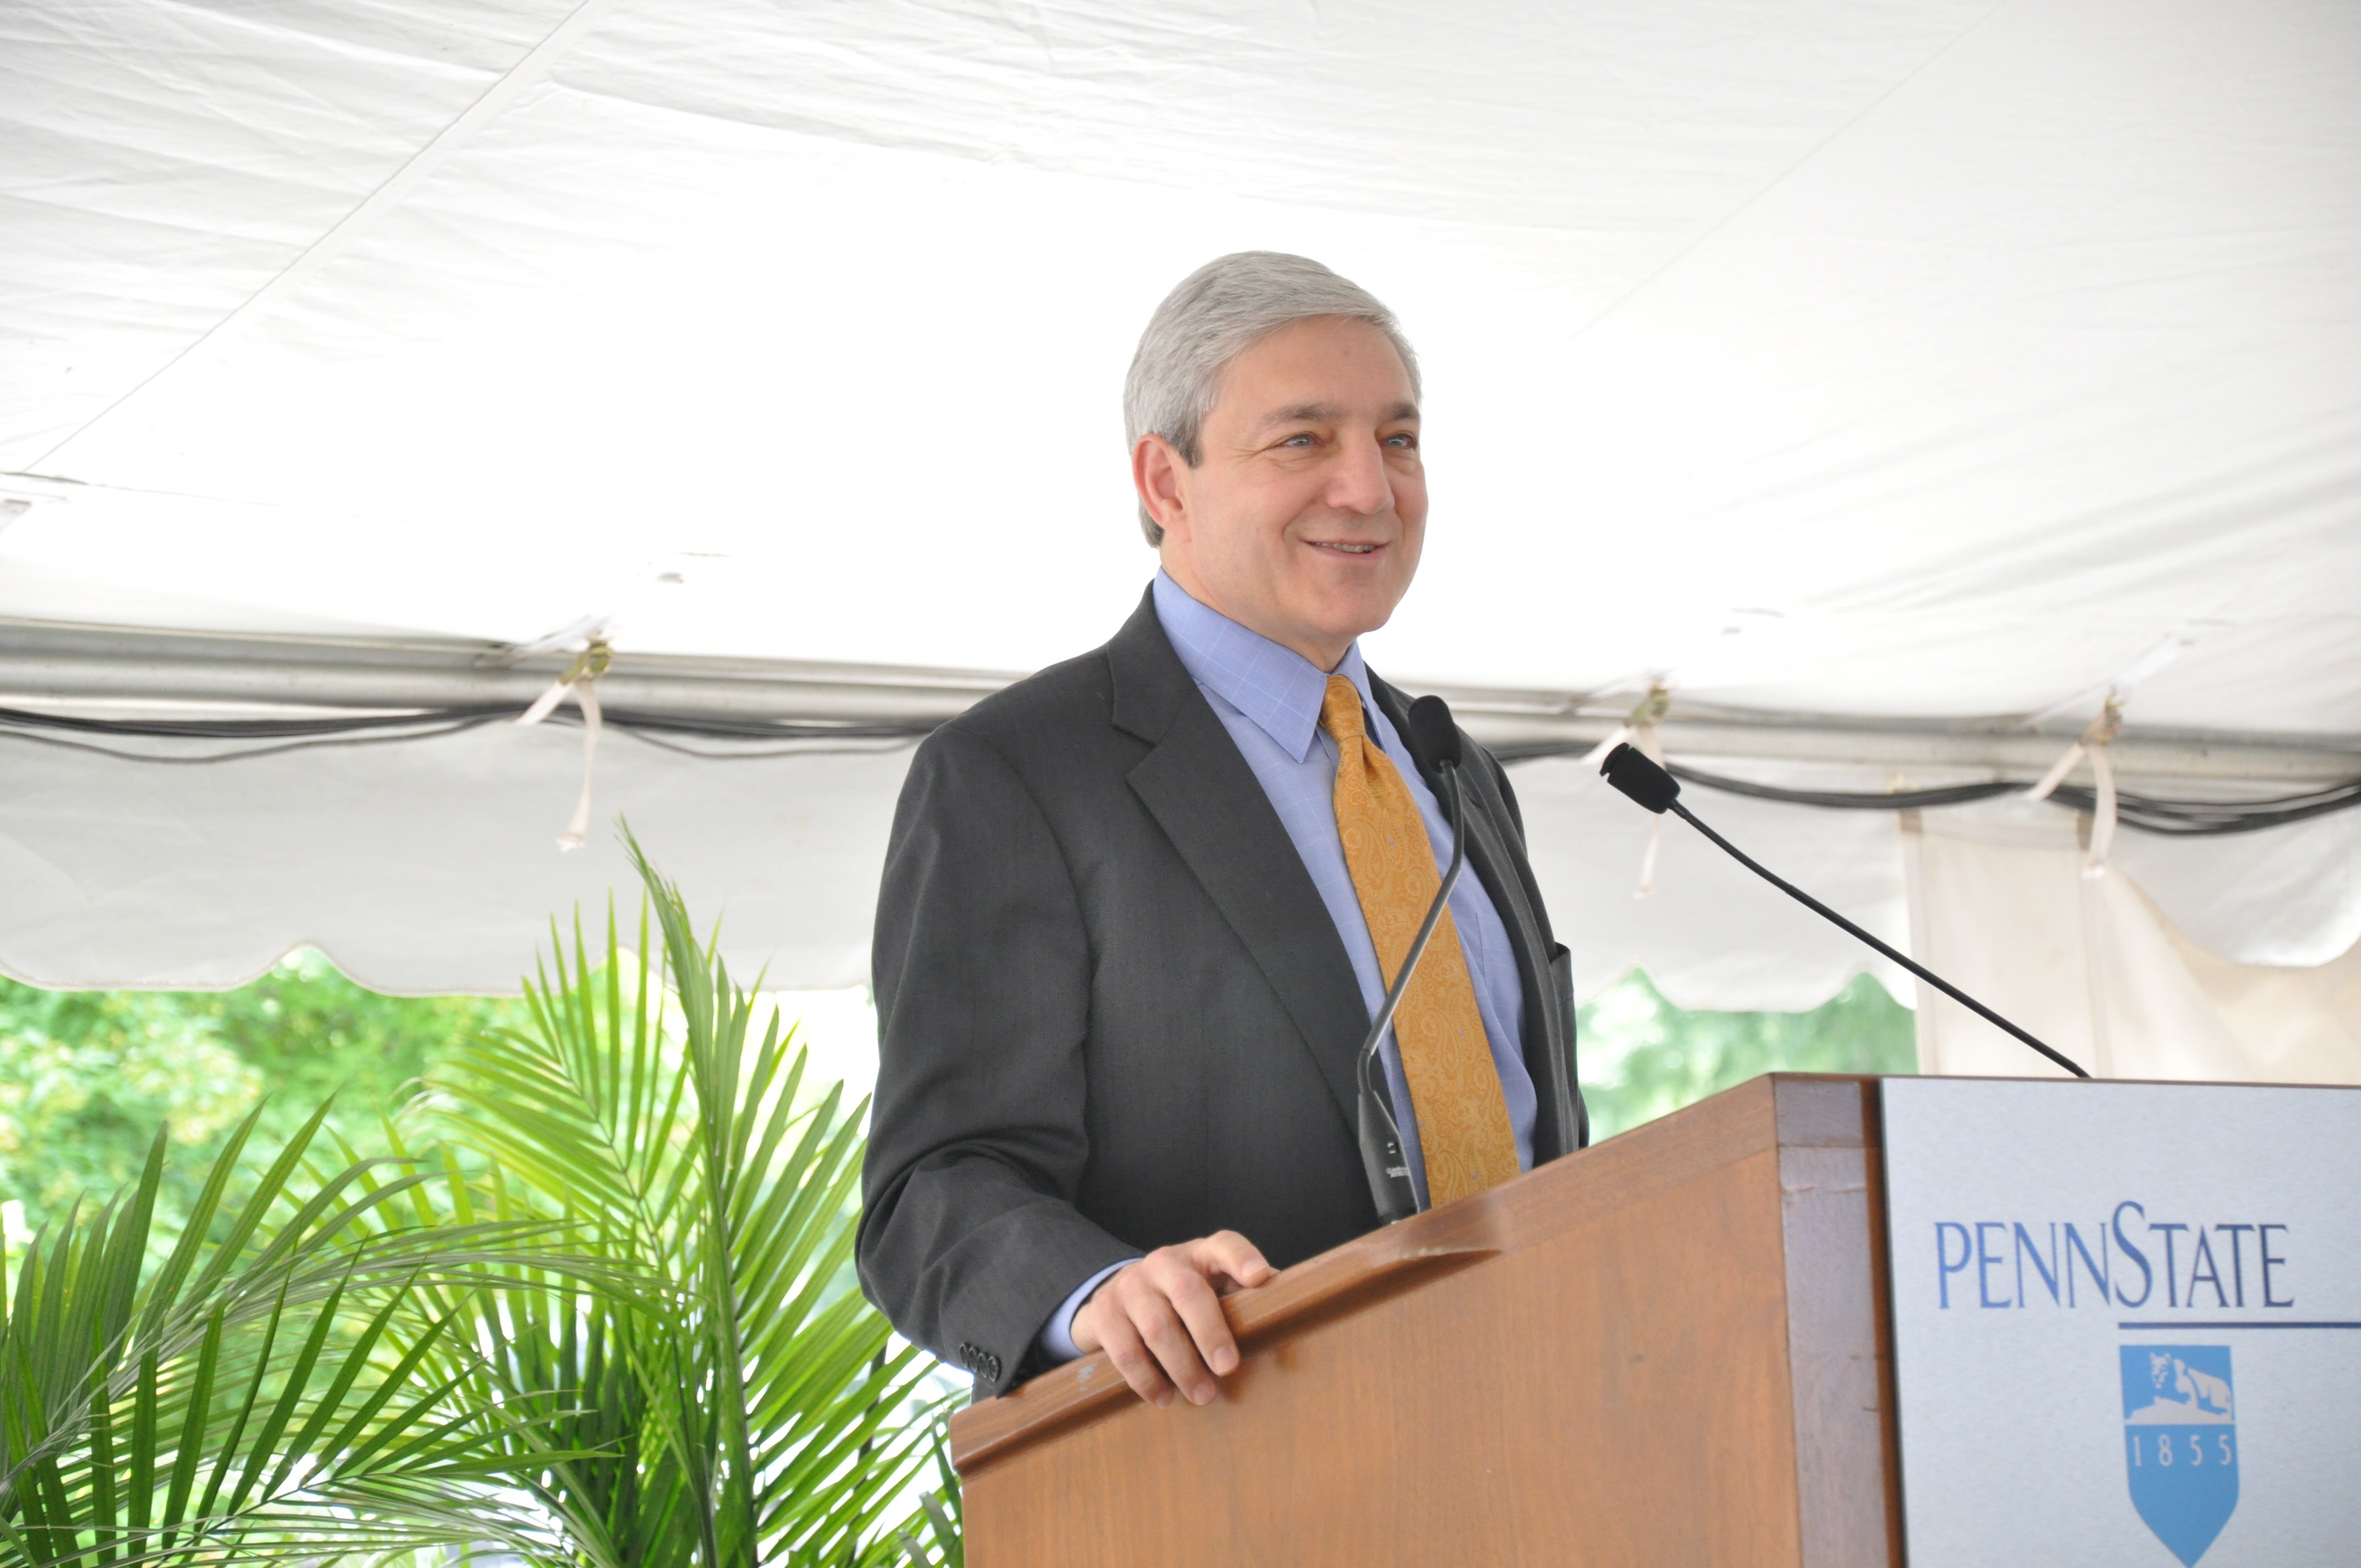 A picture of former Penn State president Graham Spanier speaking at a podium